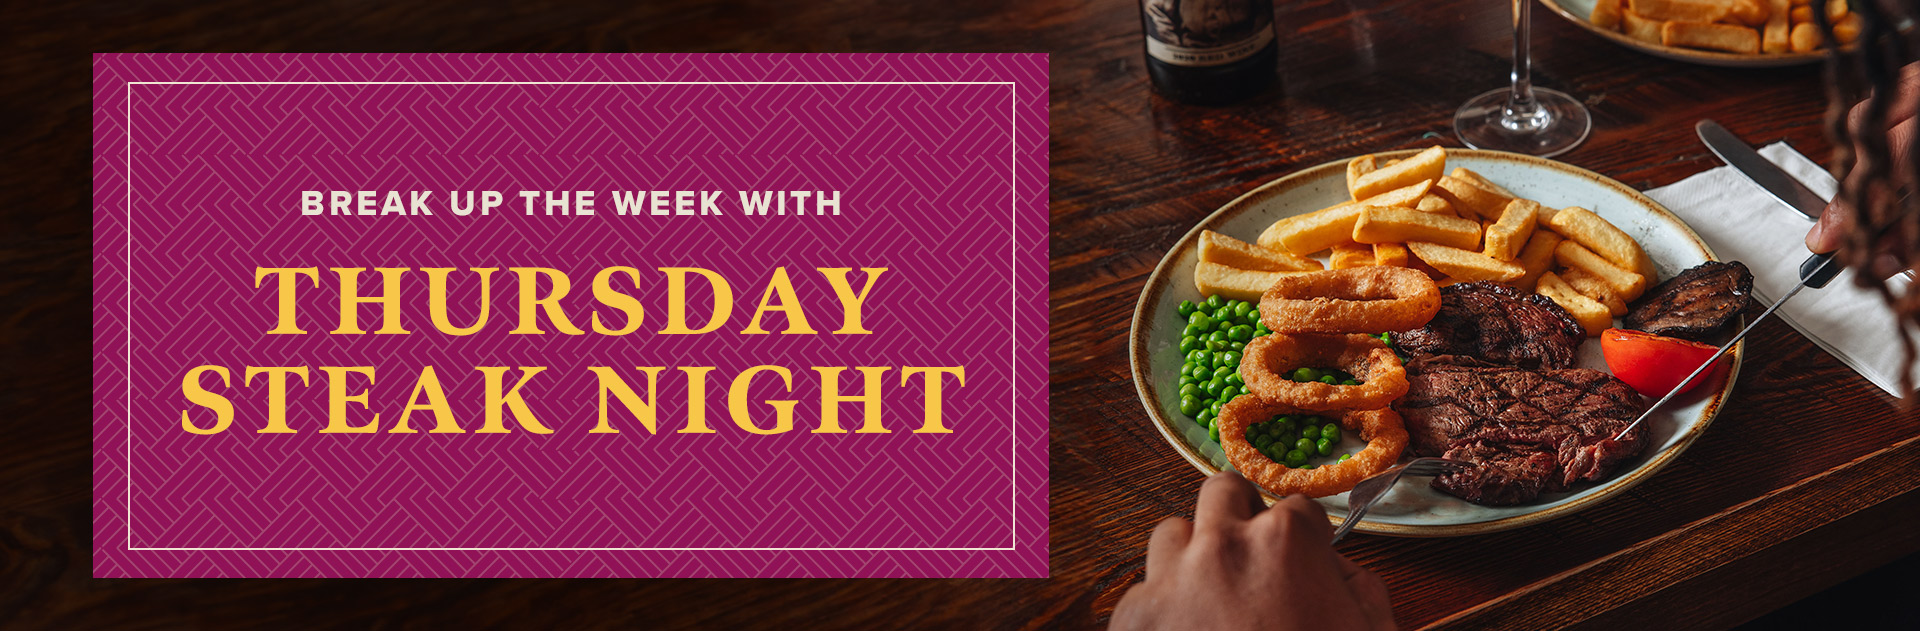 Thursday Steak Night at The Old Red Lion